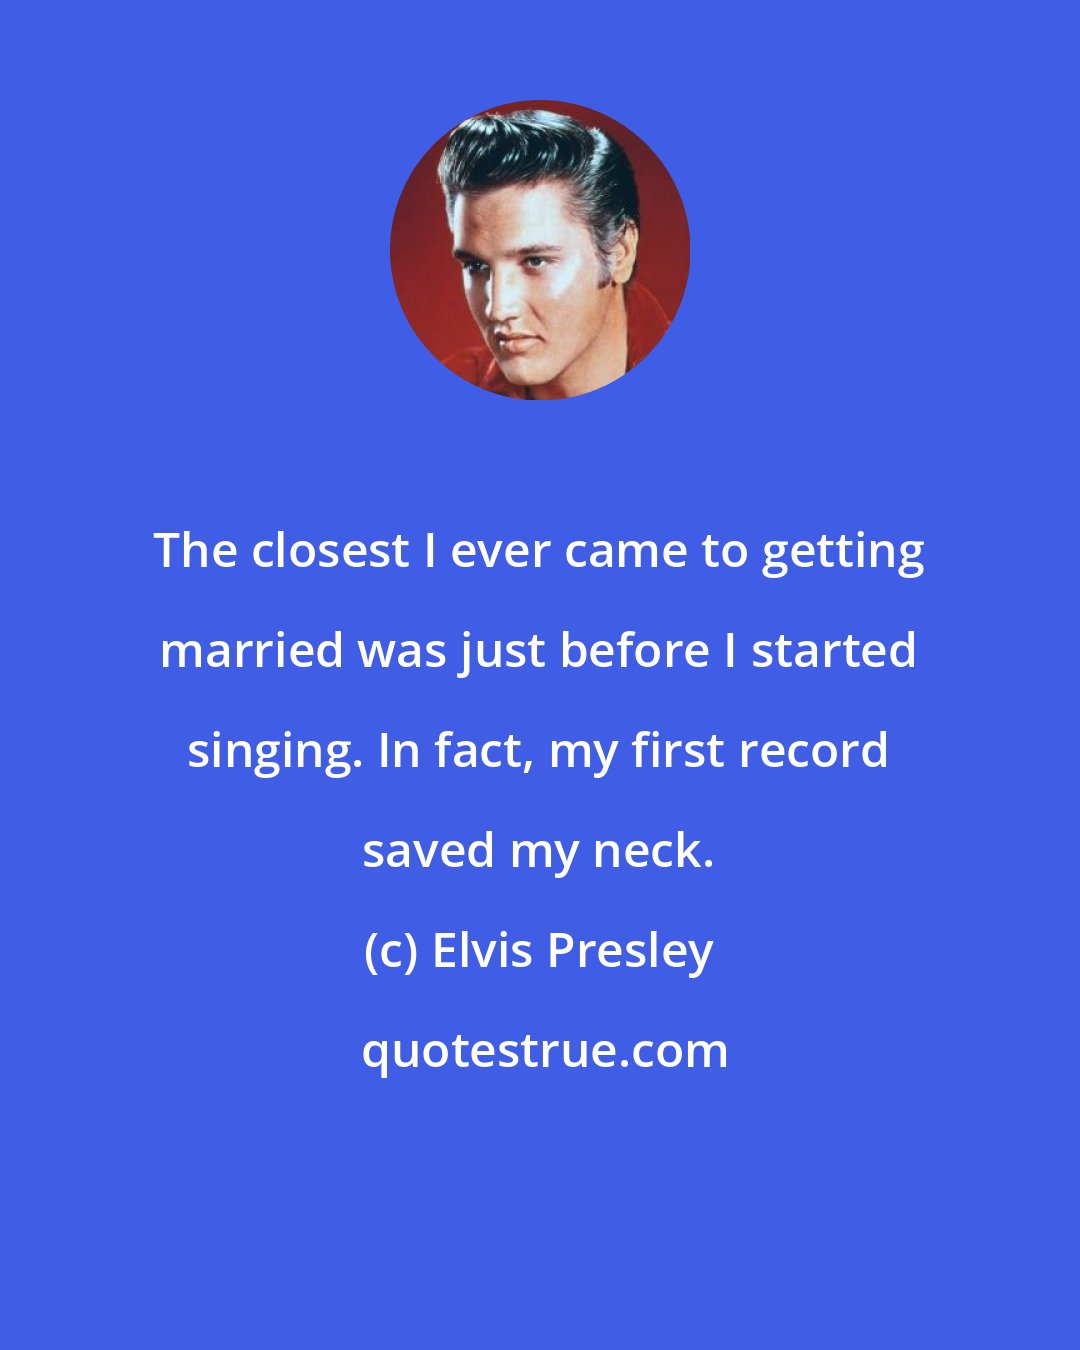 Elvis Presley: The closest I ever came to getting married was just before I started singing. In fact, my first record saved my neck.